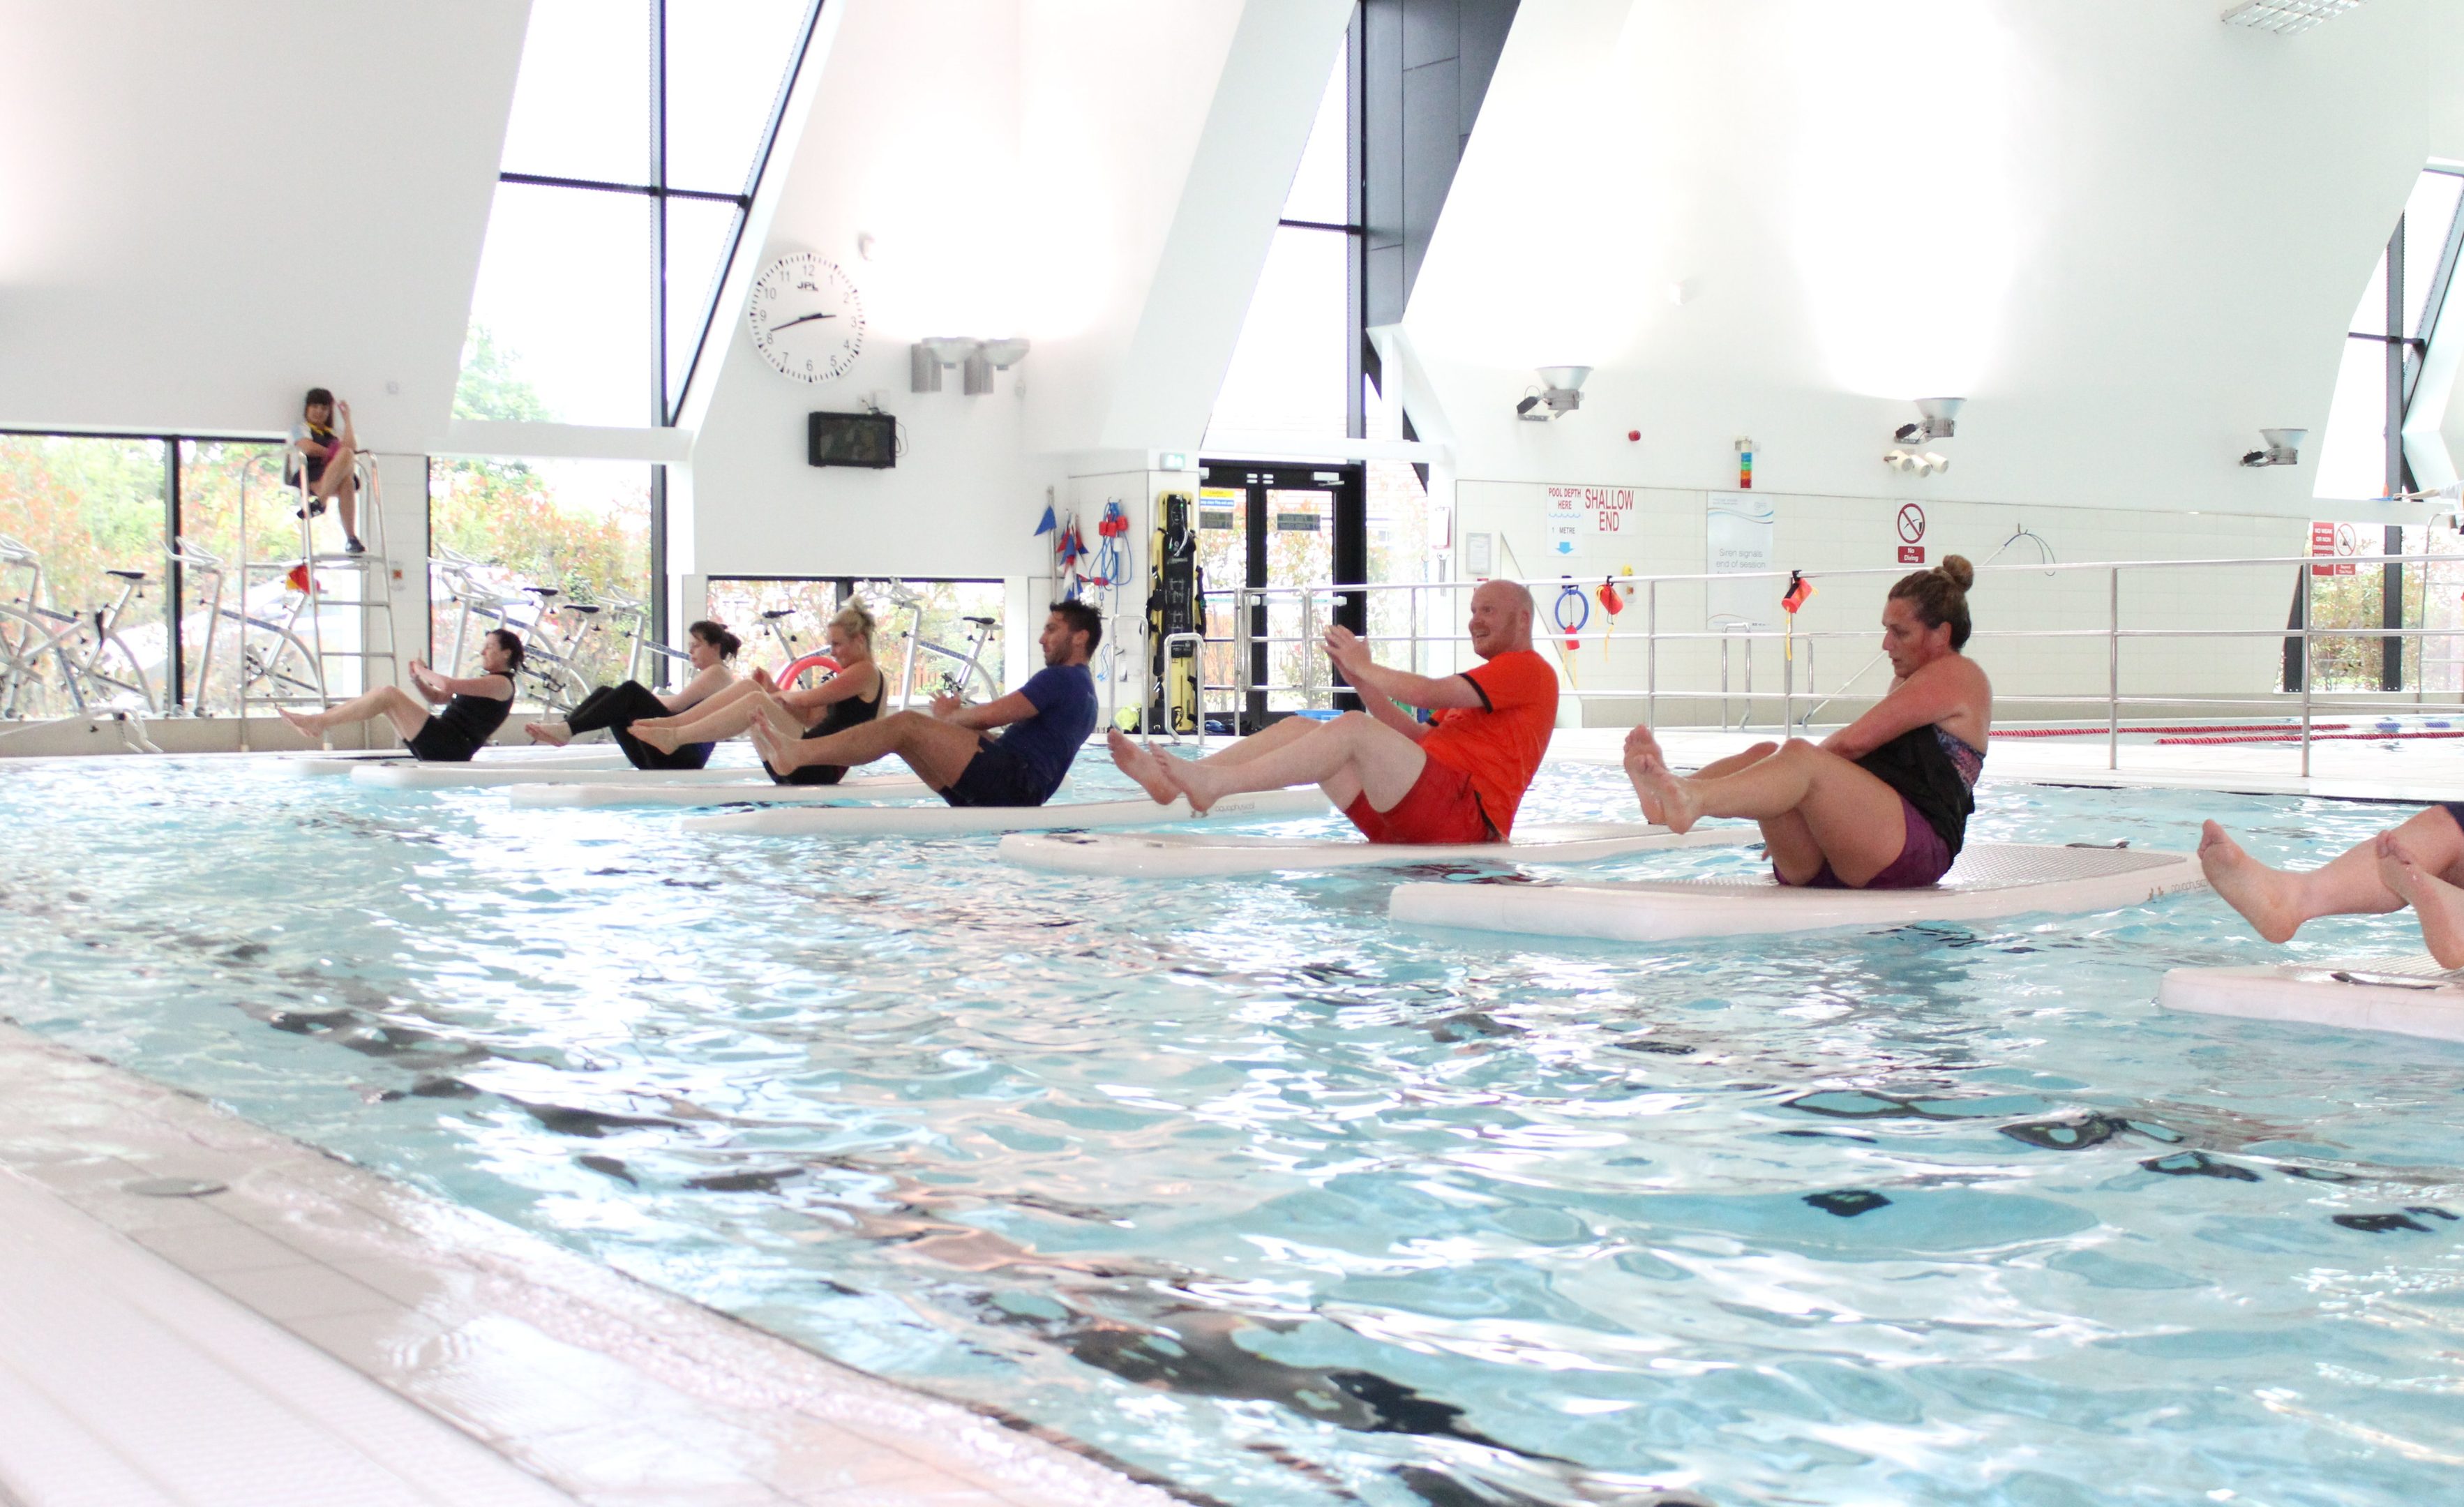 Fife Sports and Leisure Trust staff demonstrate floatfit at Michael Woods Sports and Leisure Centre in Glenrothes,